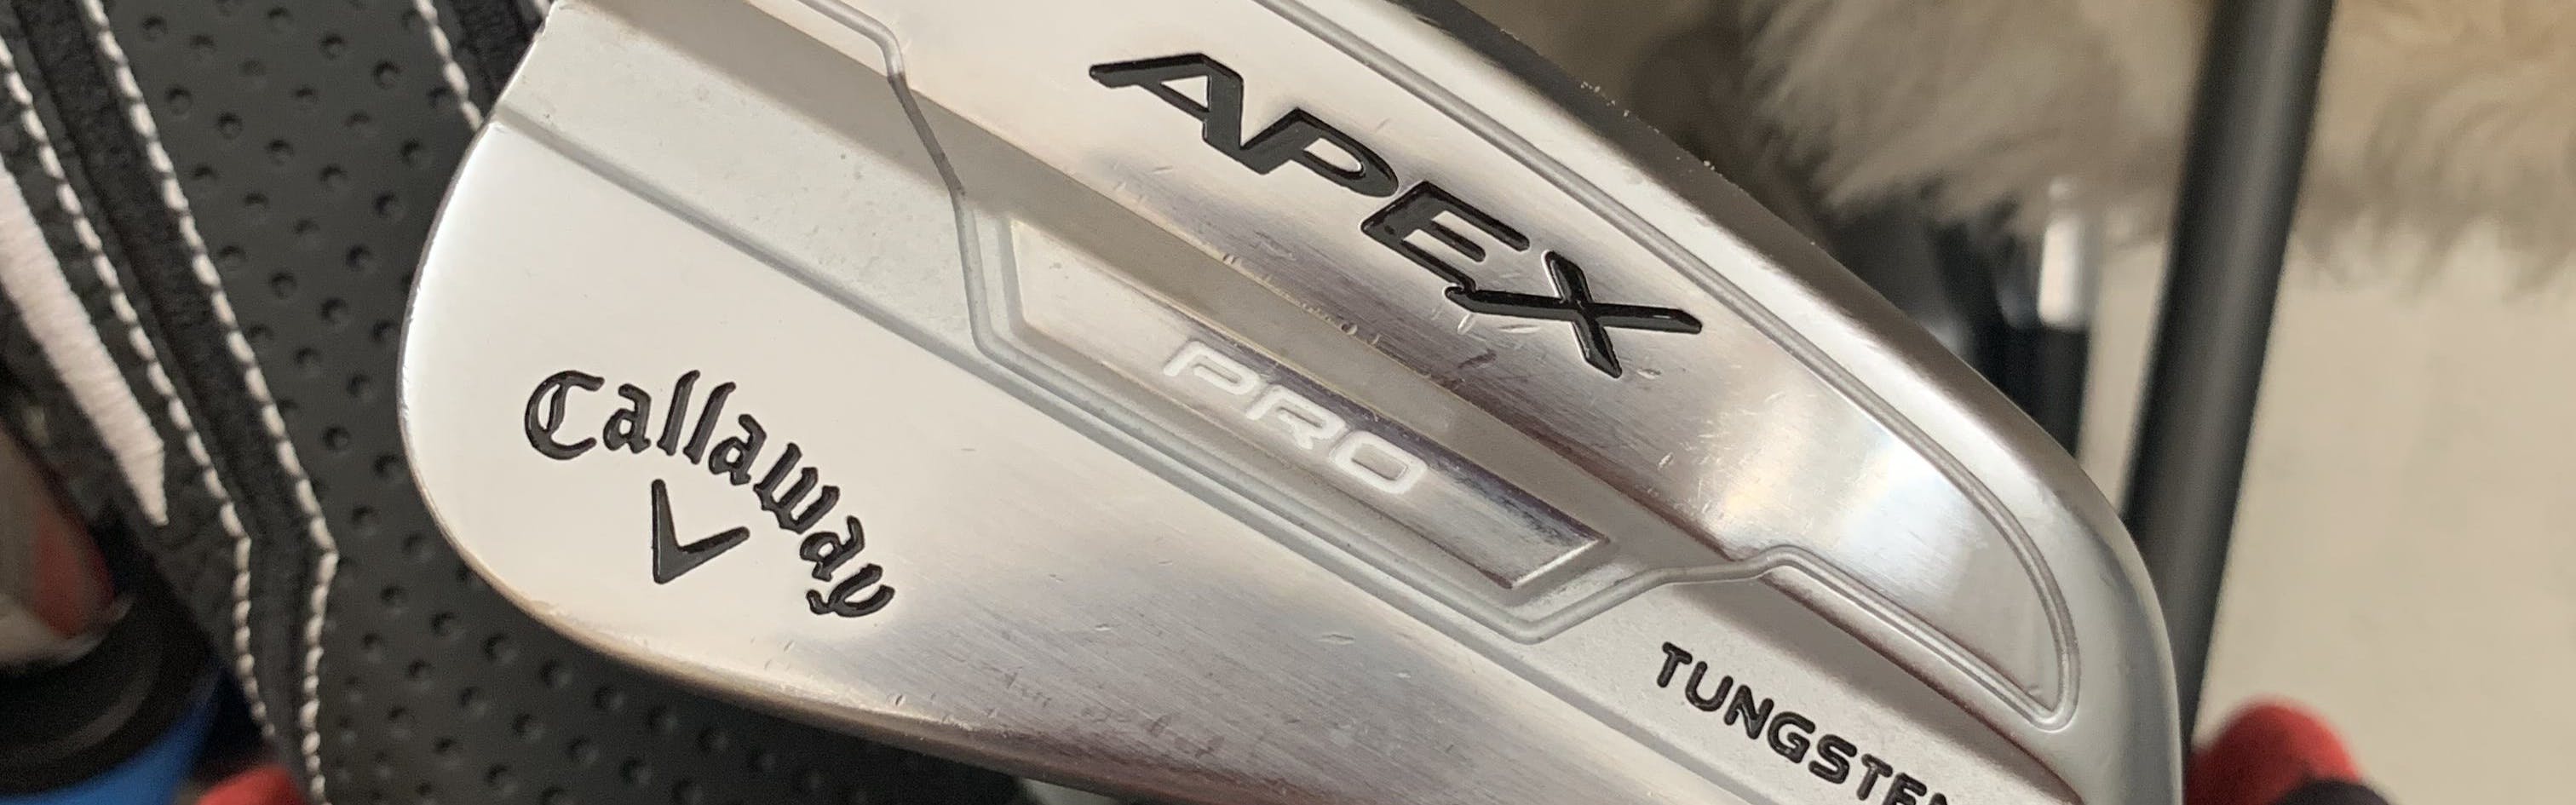 5 things you need to know about Callaway's revamped Apex iron line